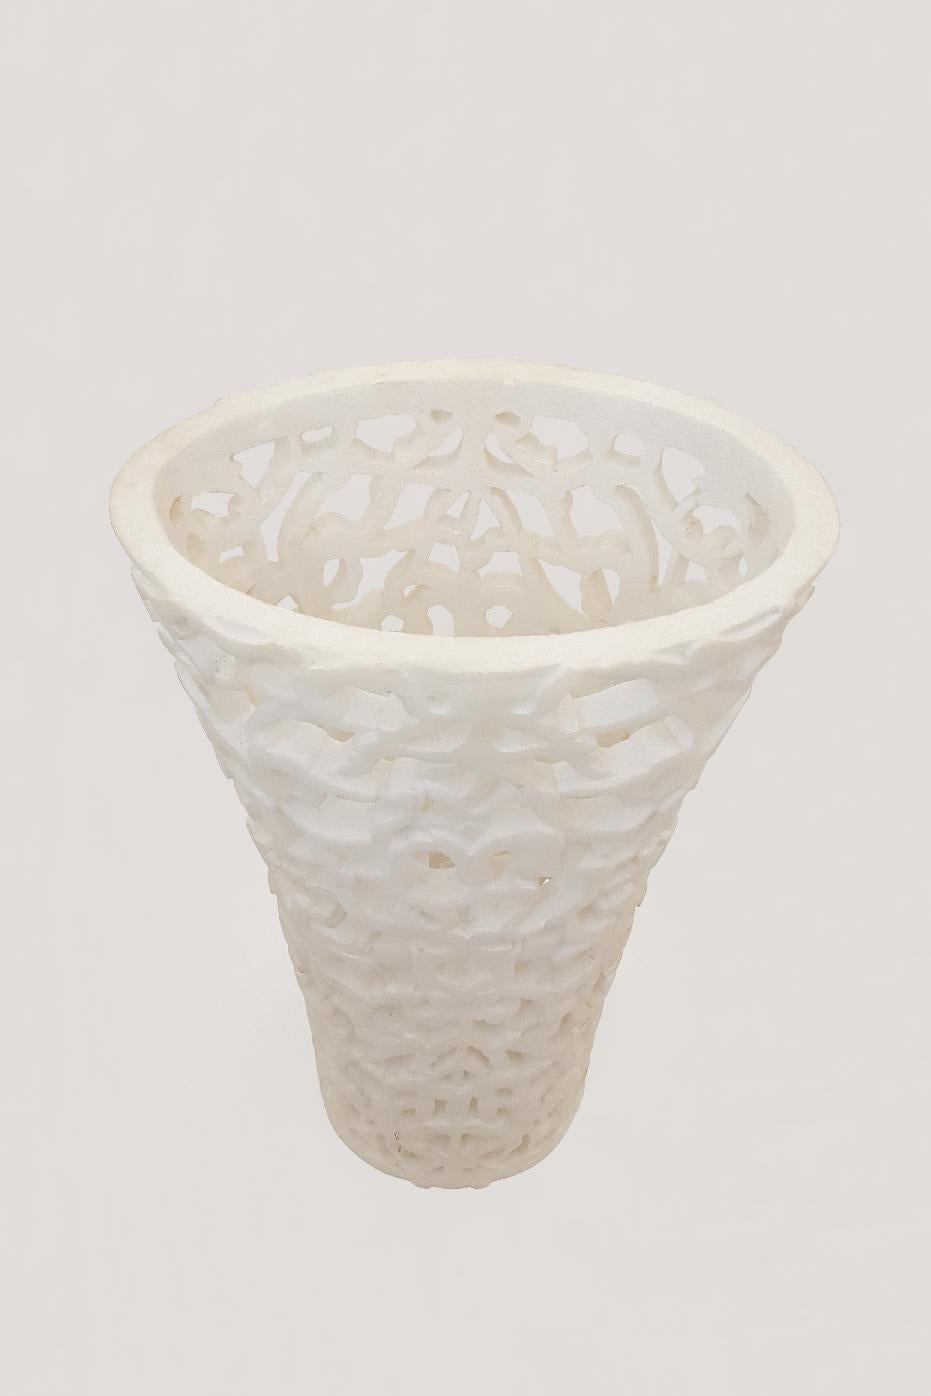 Other Floral Jali Umbrella Stand In White Marble Handcrafted In India For Sale